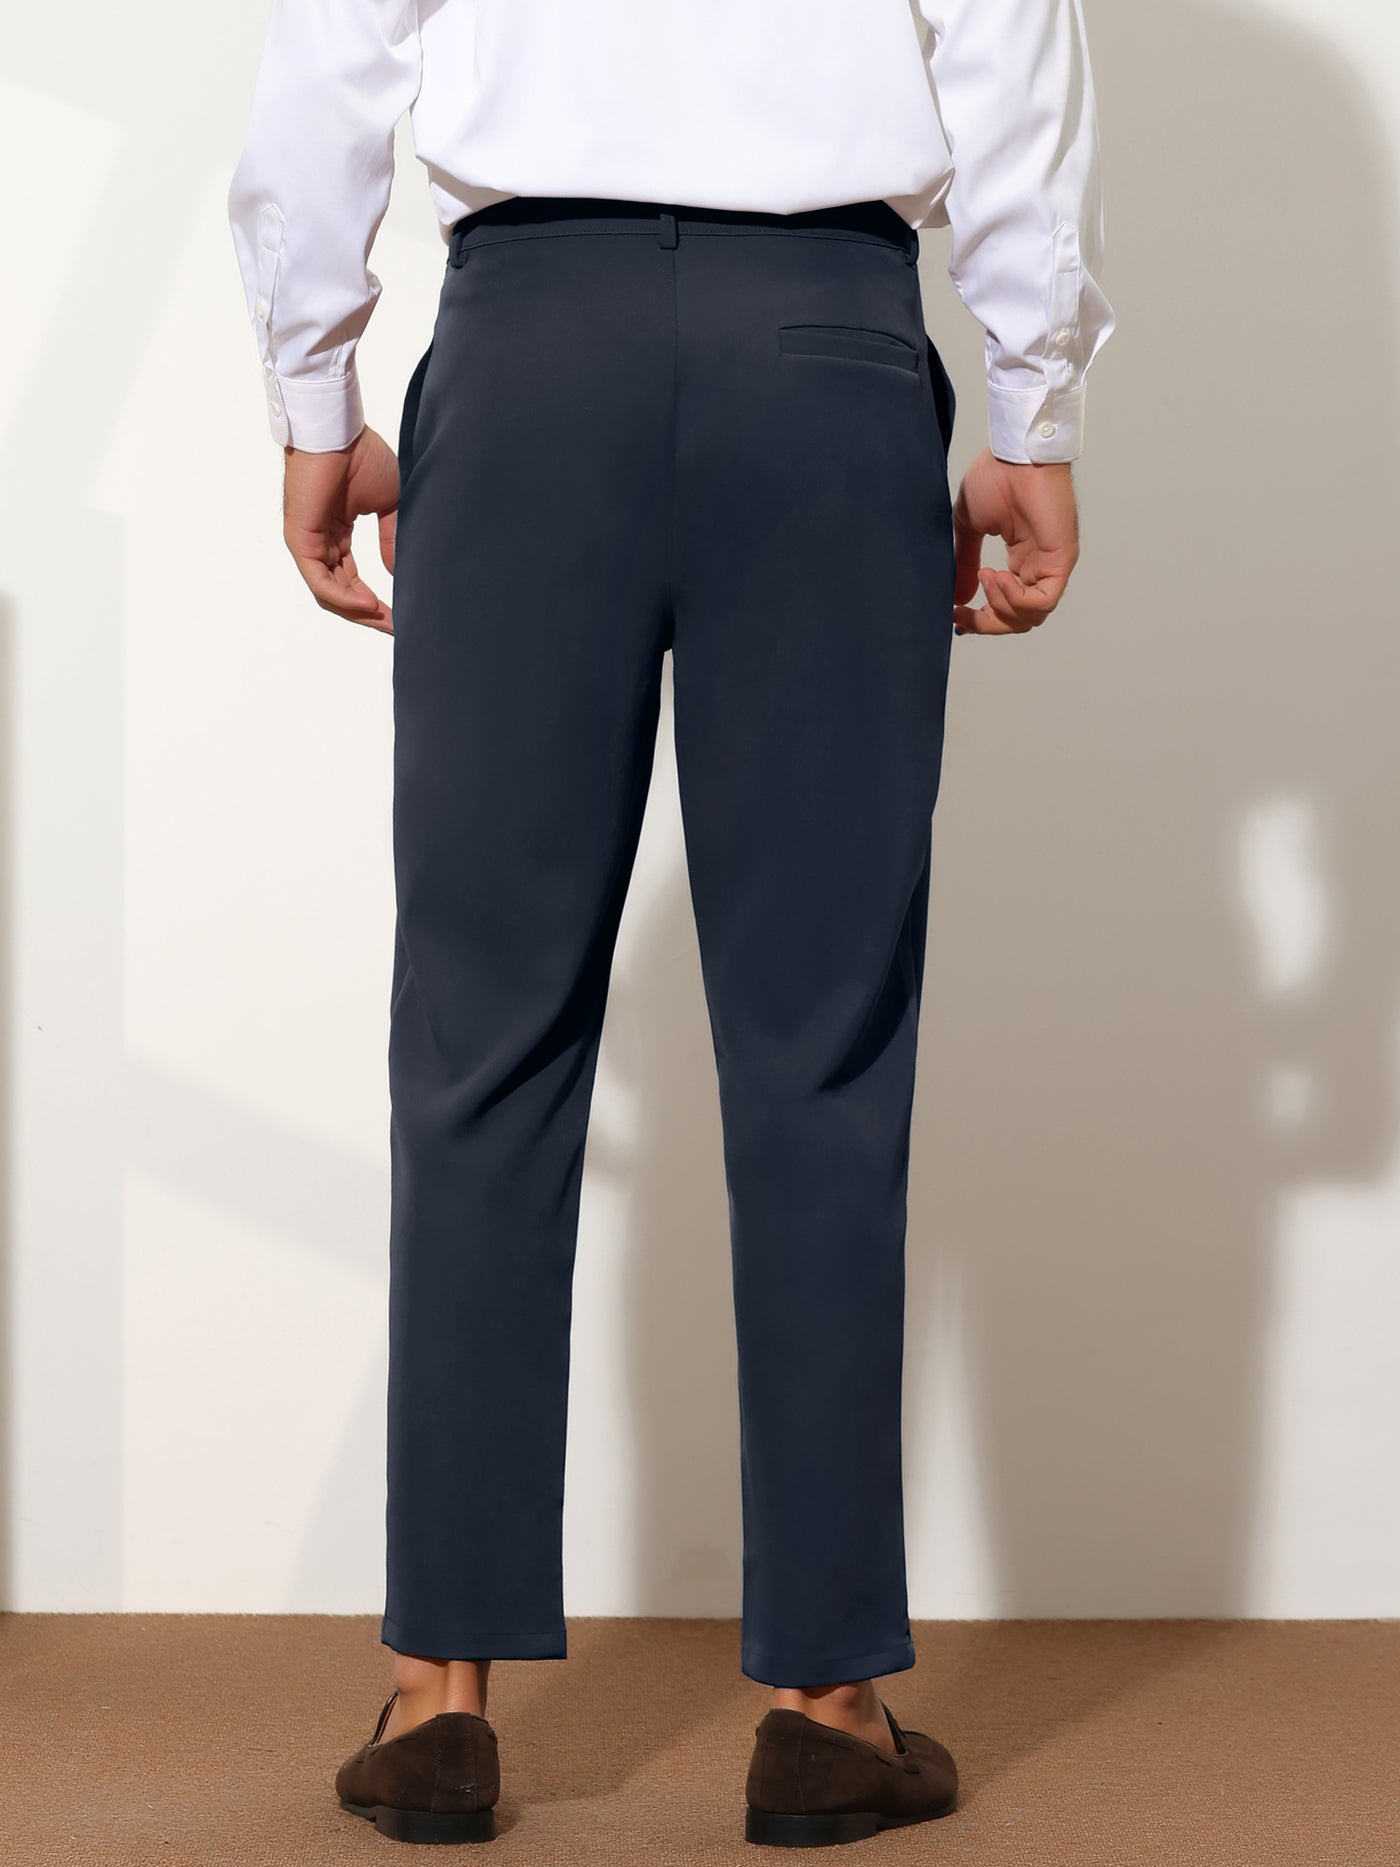 Bublédon Dress Pants for Men's Tapered Solid Color Slim Fit Pleated Front Trousers